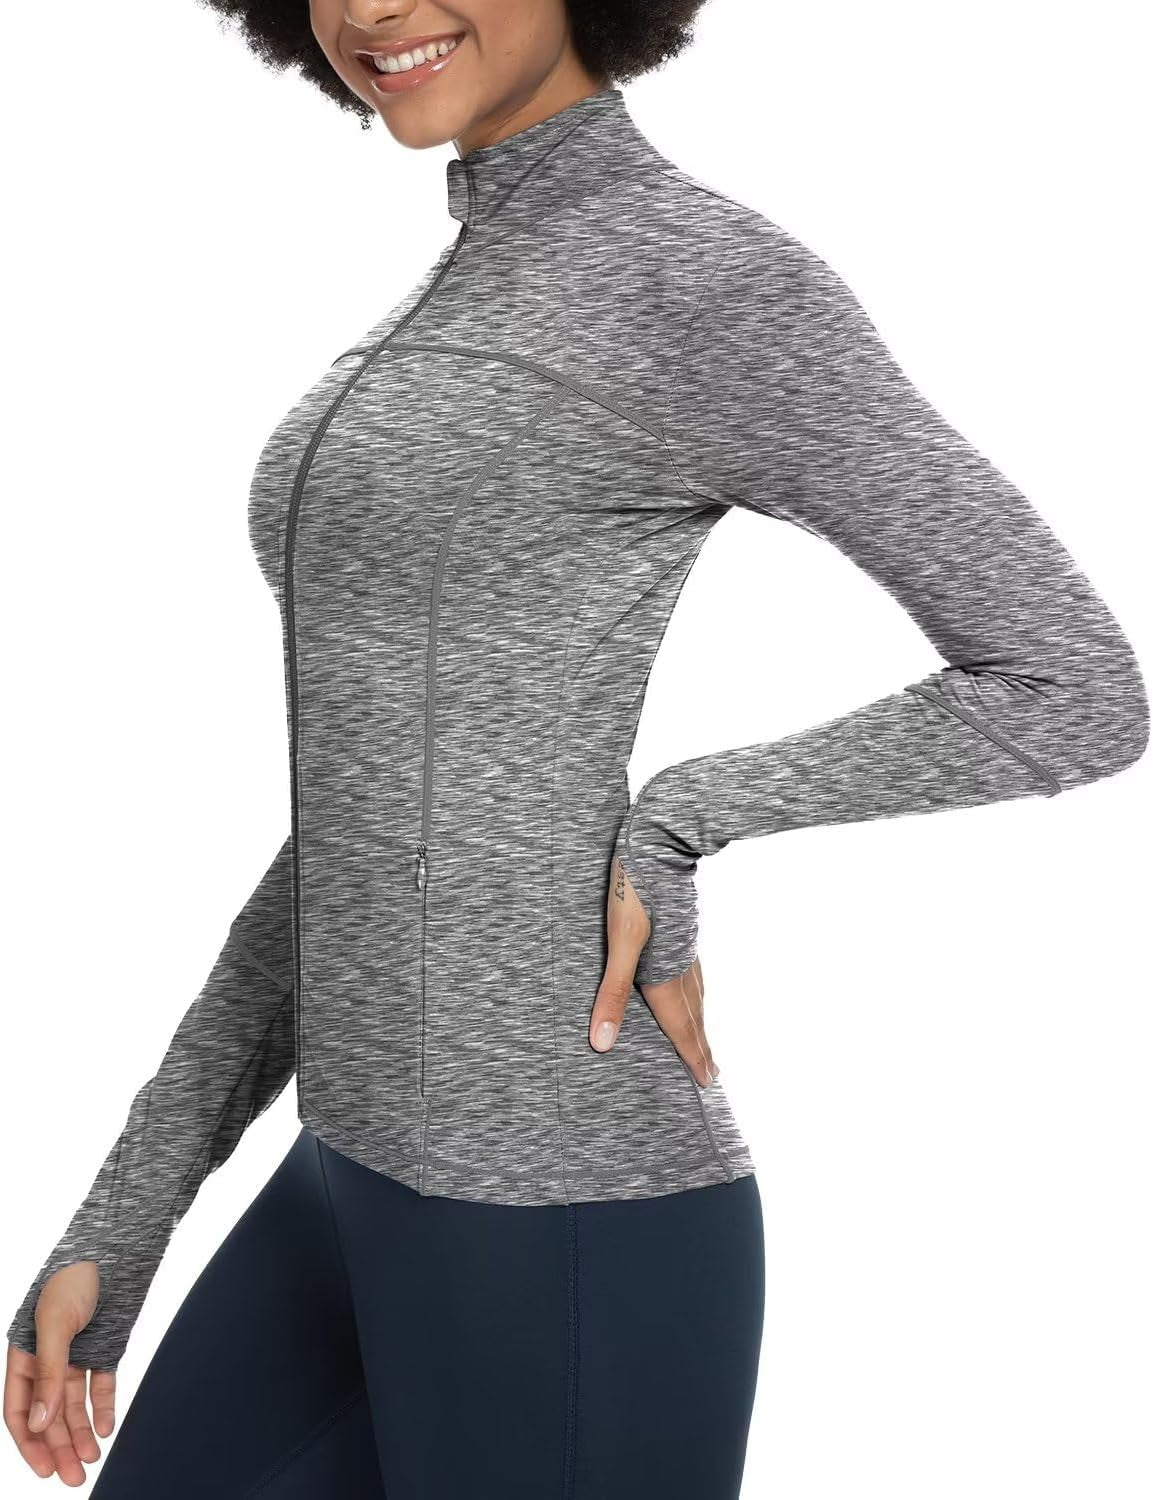 "Enhance Your Style and Energize Your Workout with the Premium Women's Full Zip Athletic Running Jacket - Ideal for Fitness, Yoga, and Exercise!"